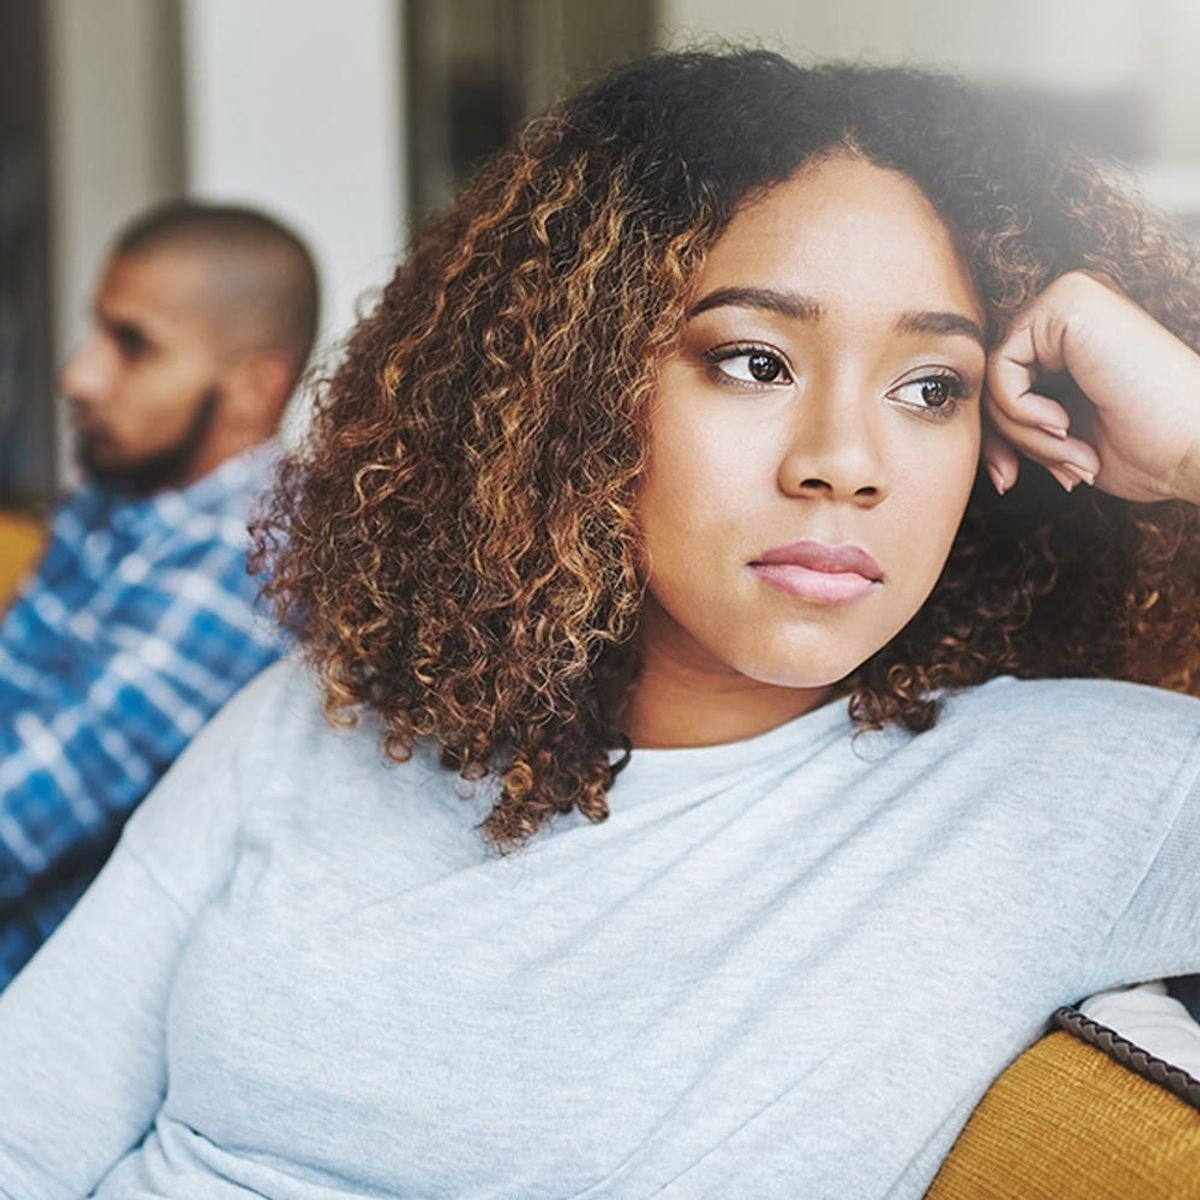 7 Questions to Ask Yourself Before Venting About Your Relationship